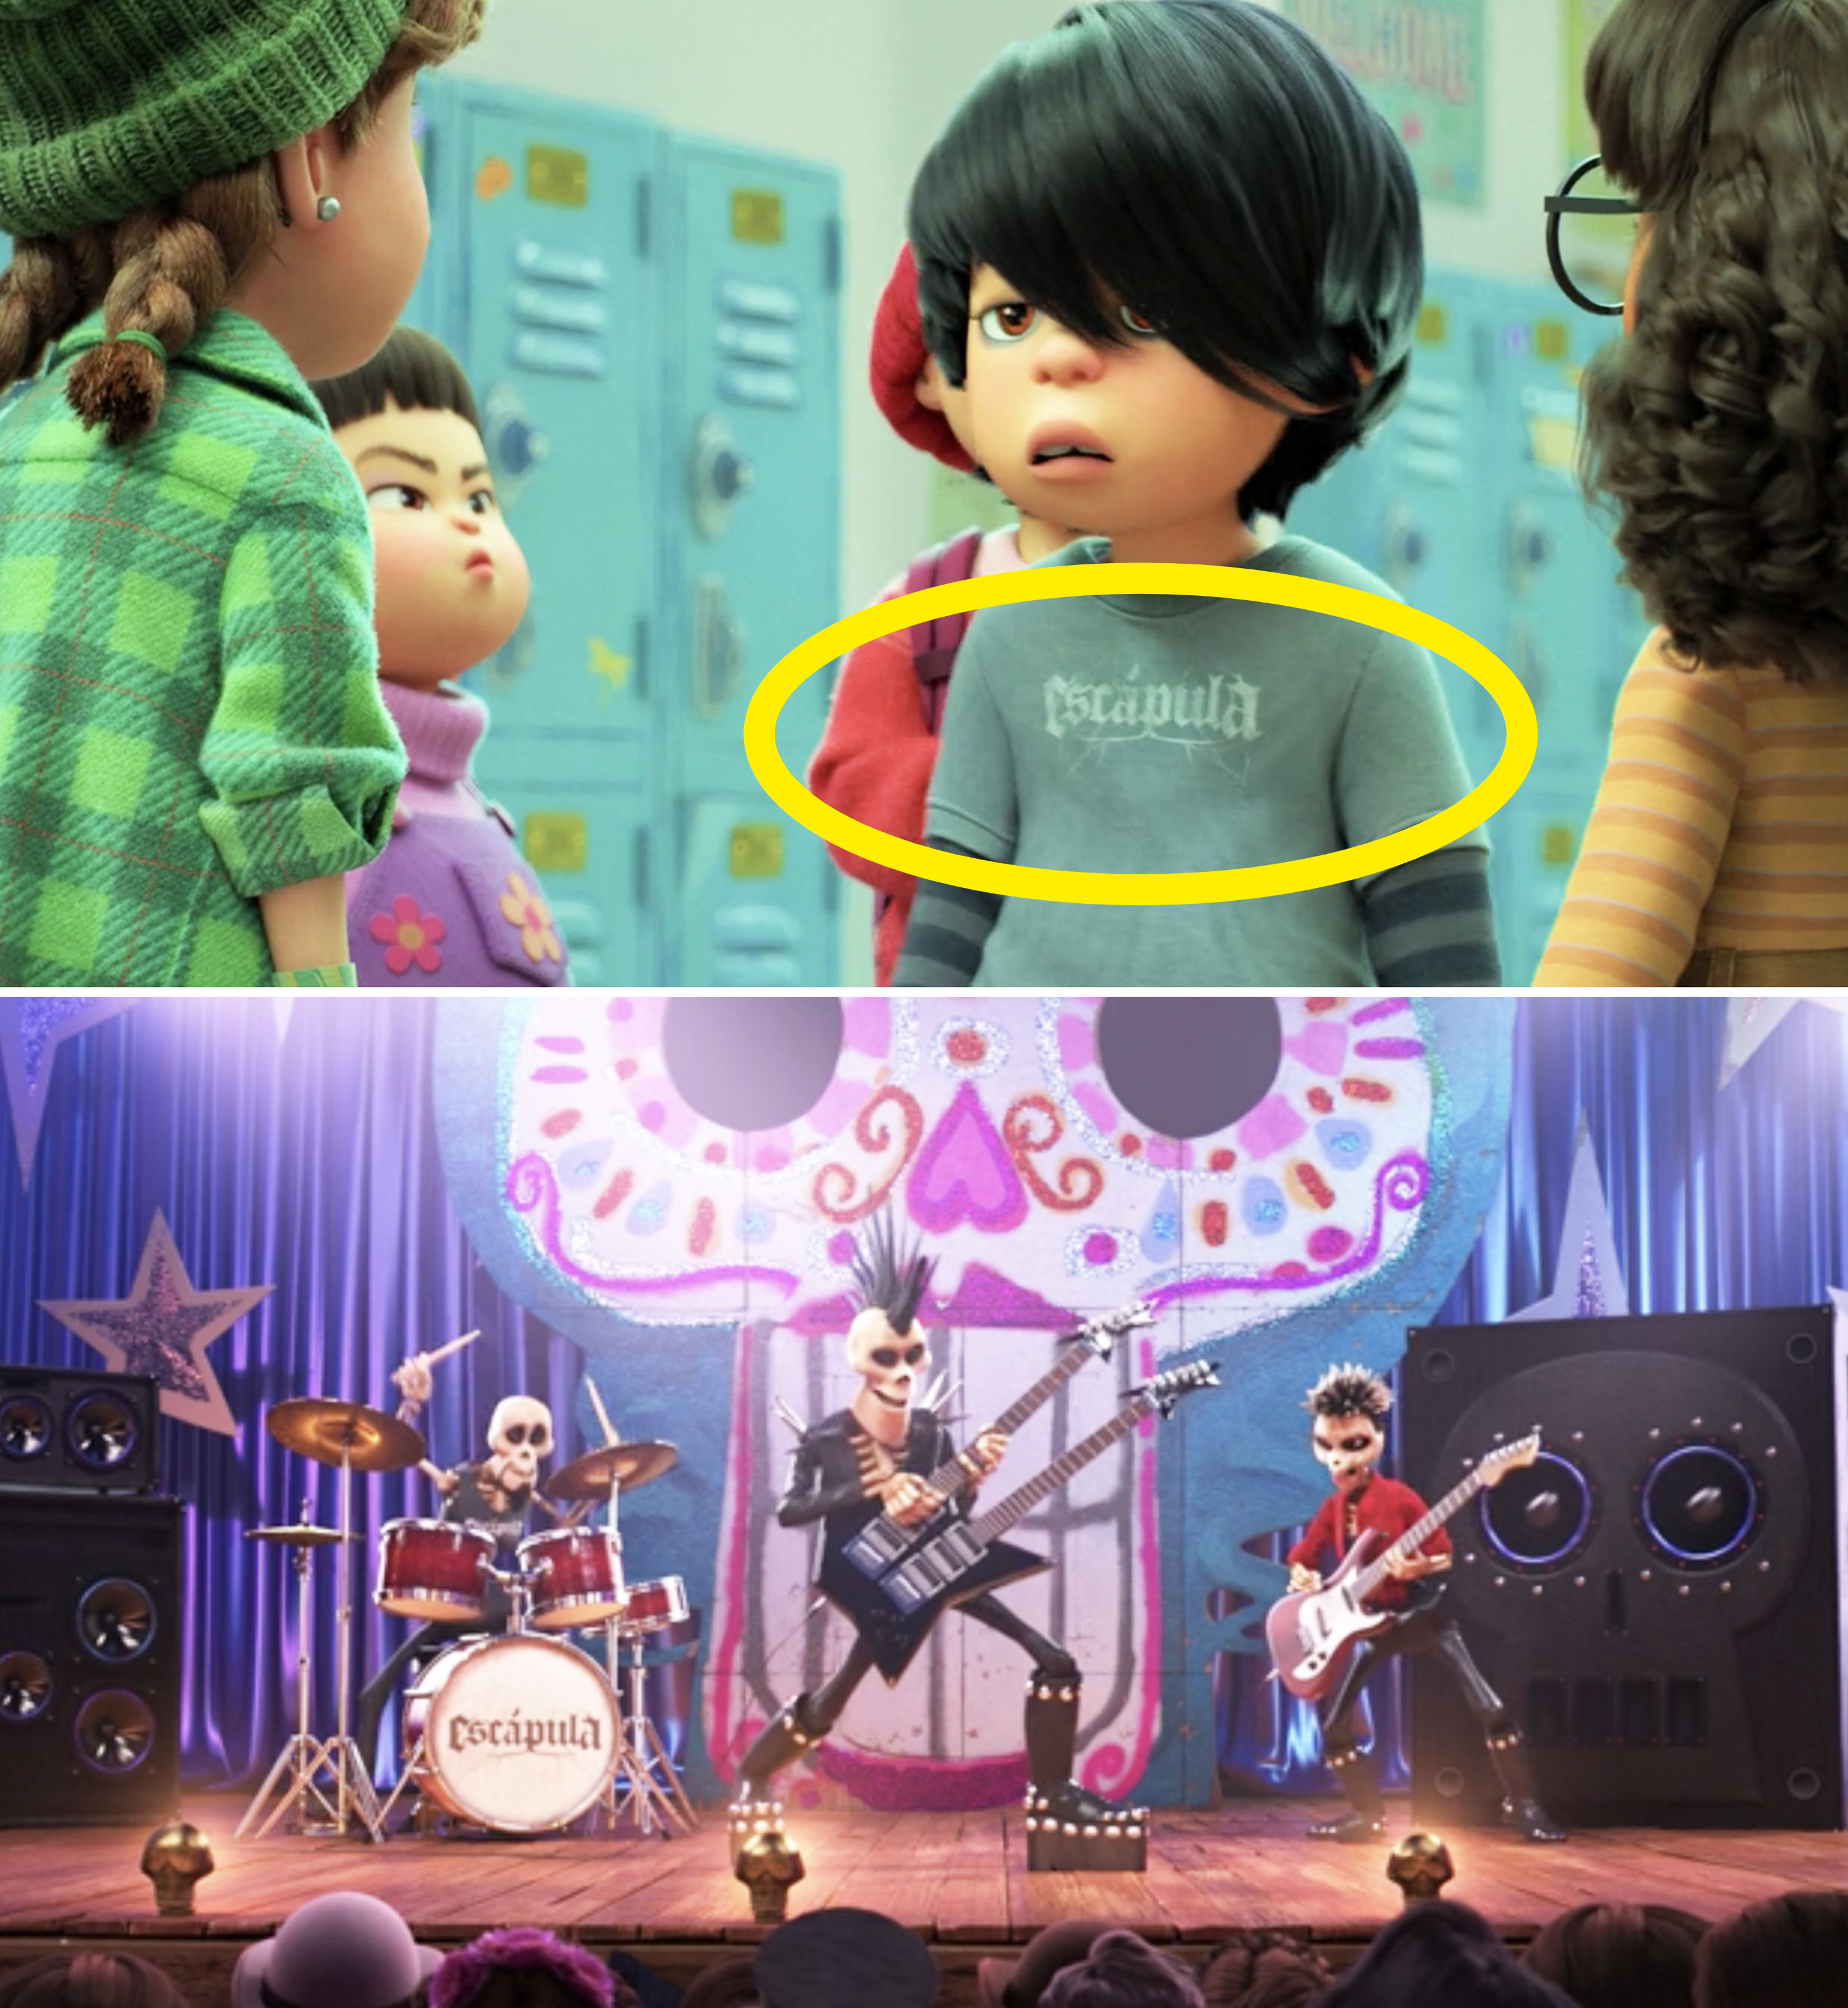 Escápula playing in a scene from Coco